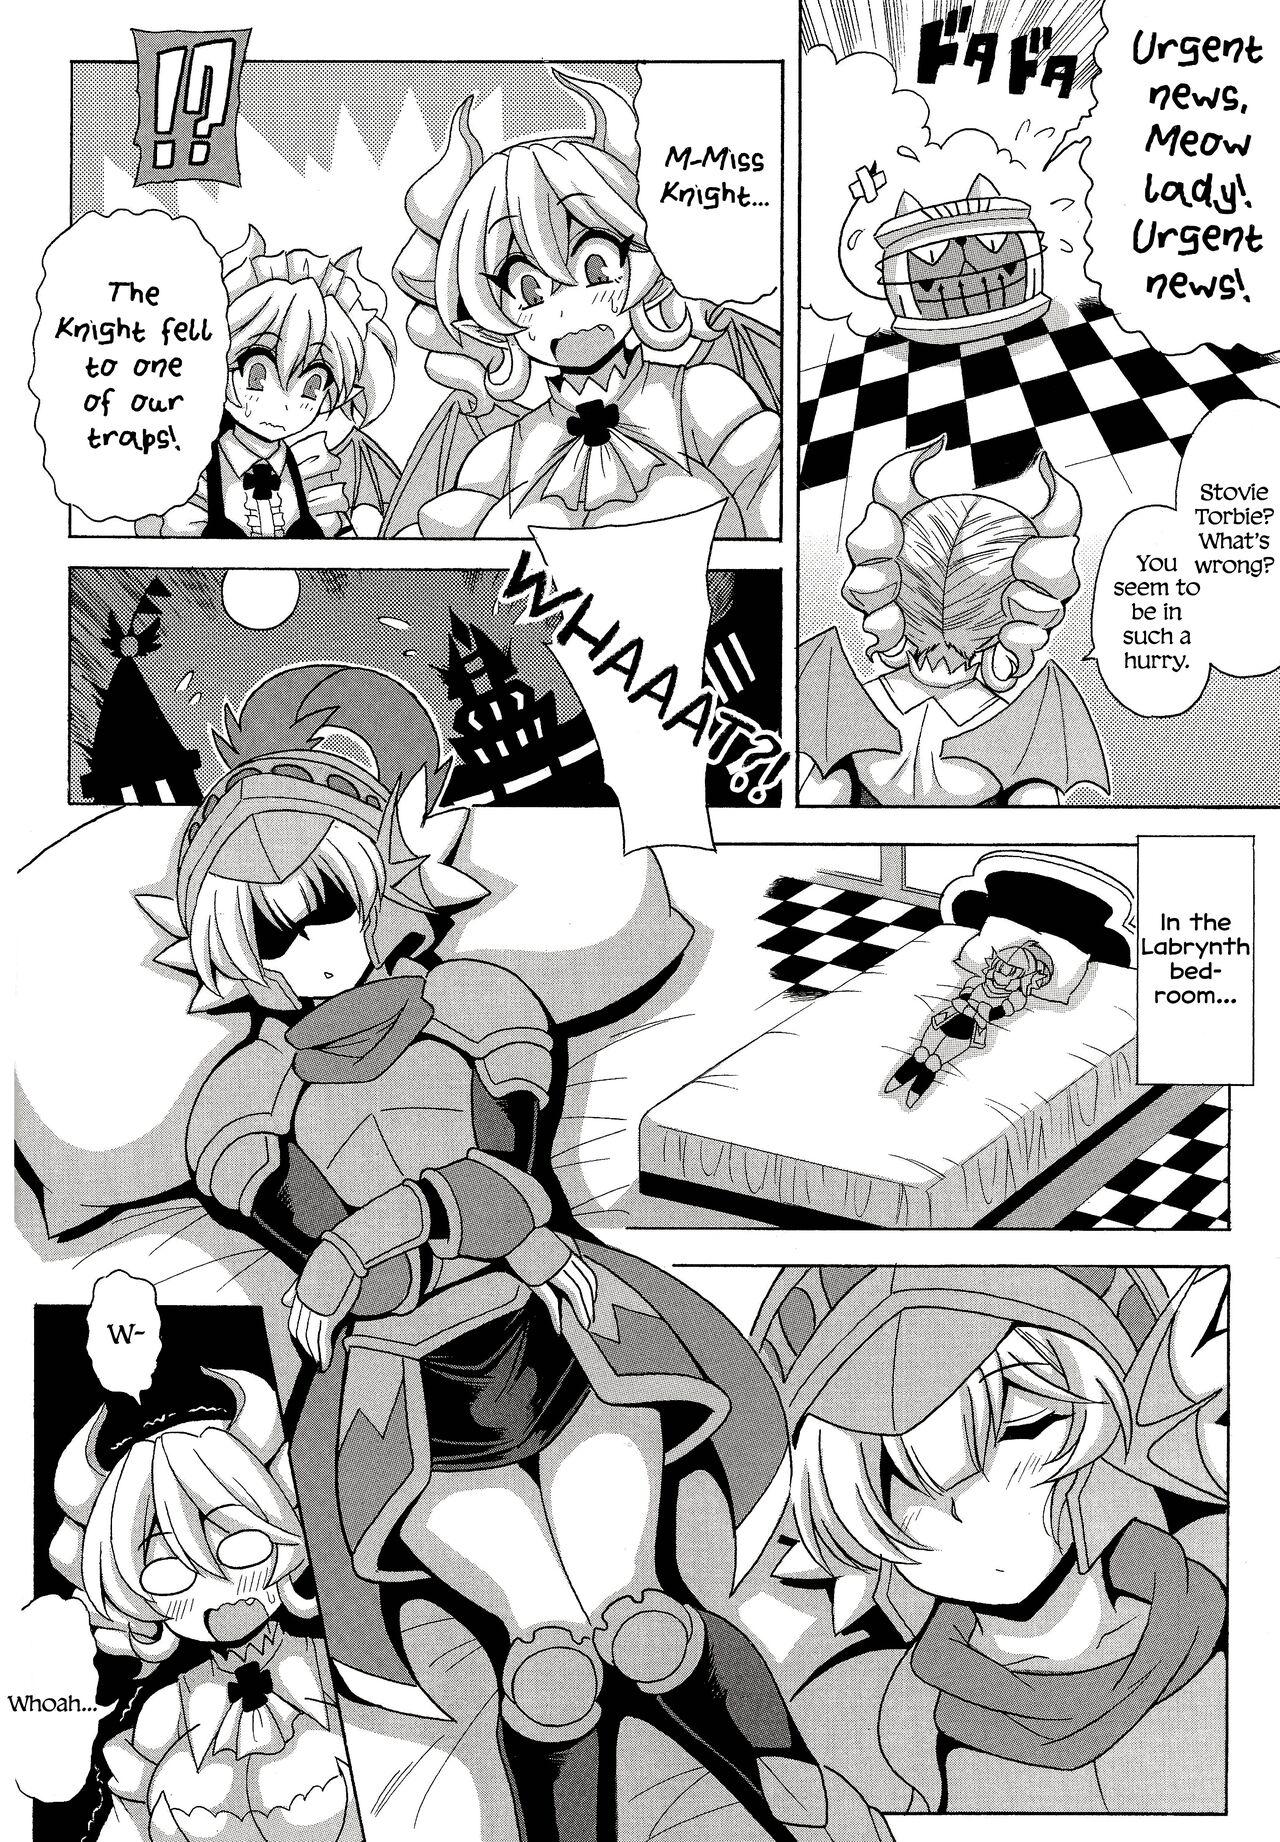 Con LABRYNTH MILK - Yu gi oh Face Fucking - Page 5